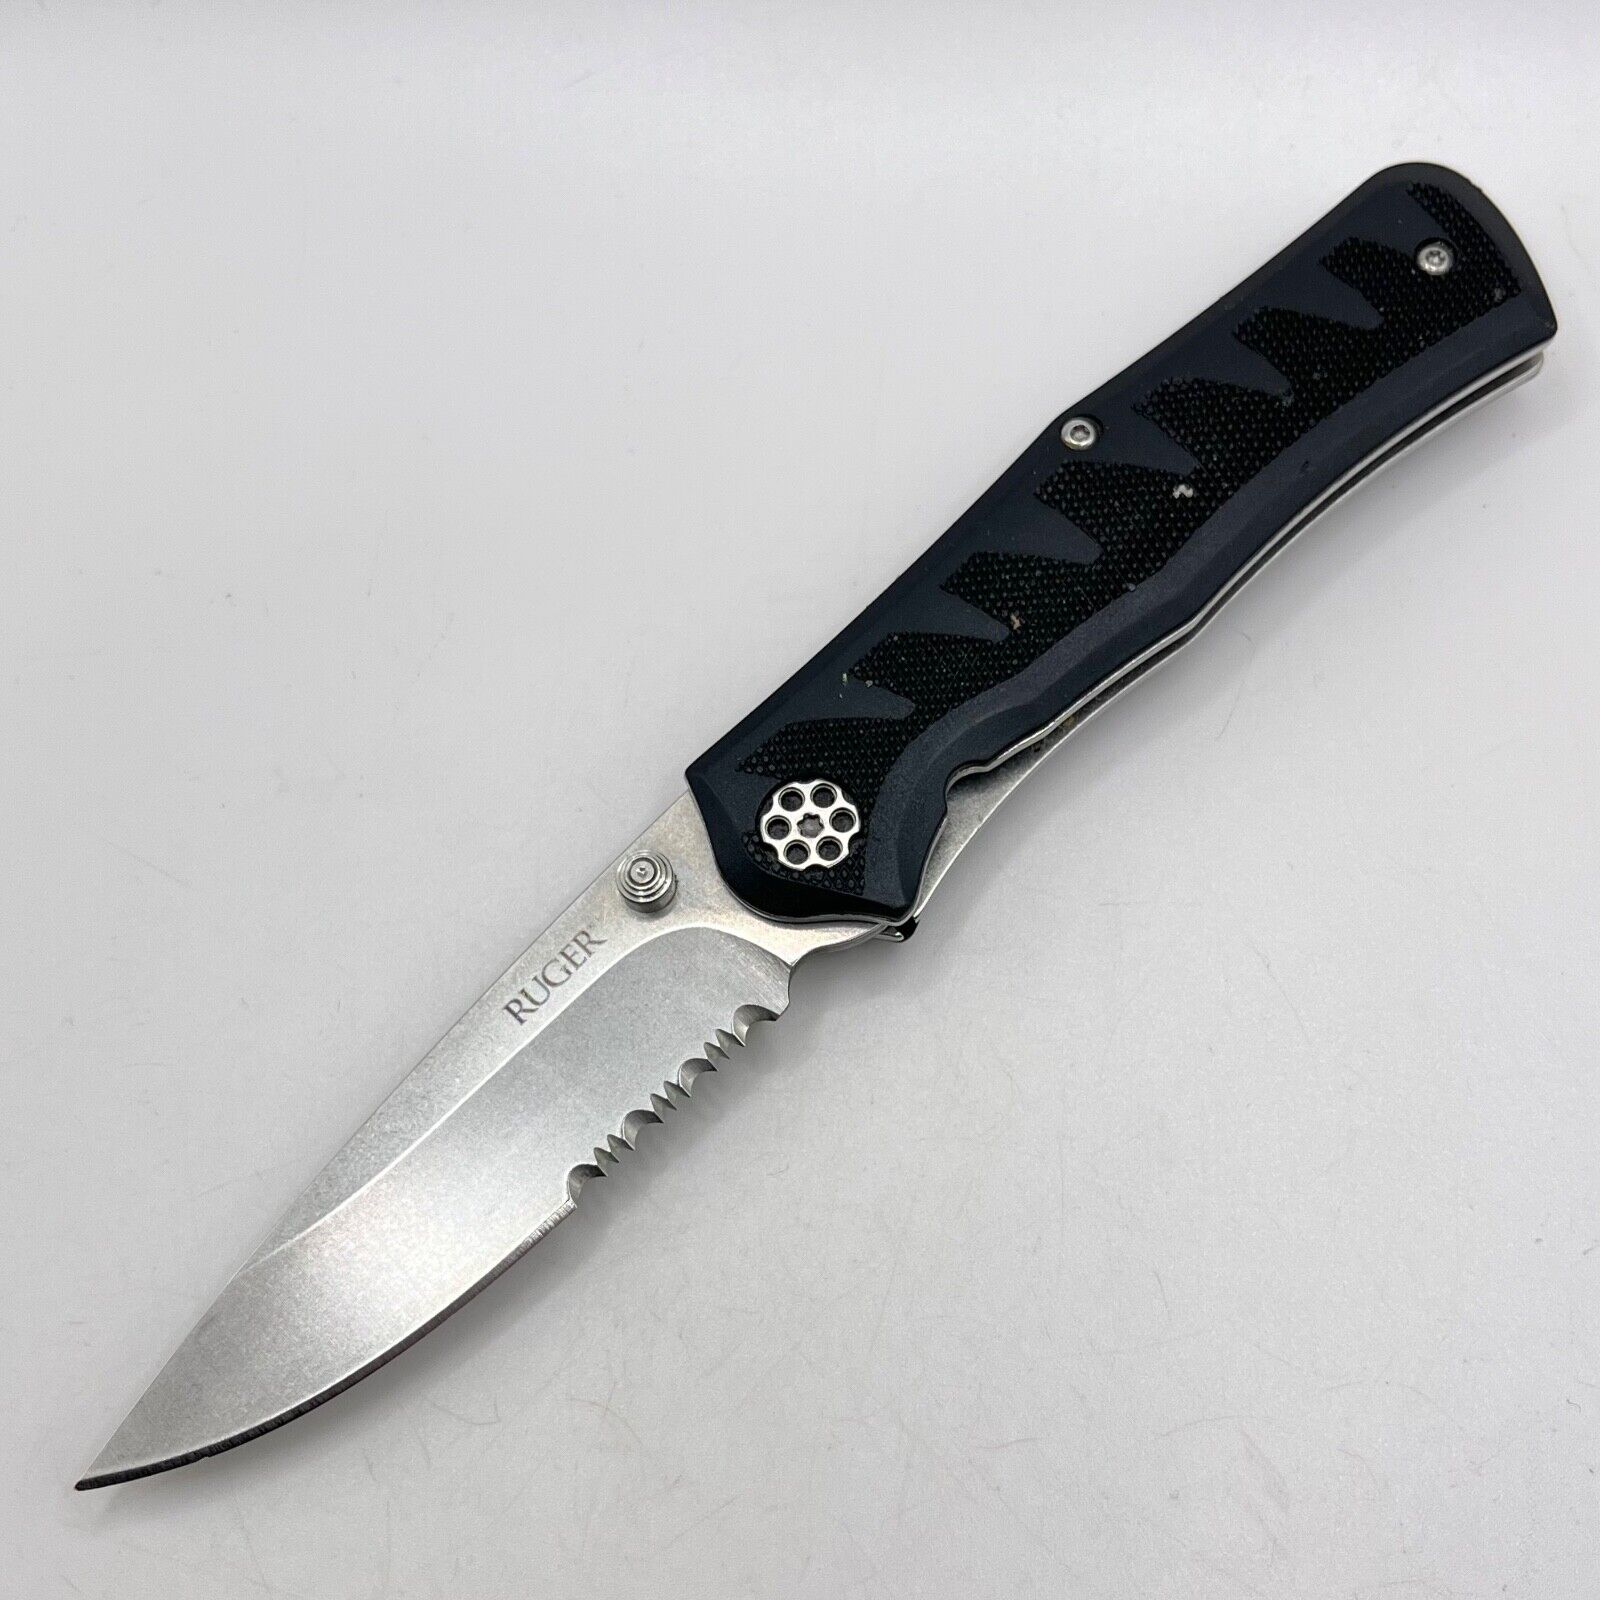 CRKT Ruger Crack-Shot Compact Pocket Knife Discontinued - Great condition